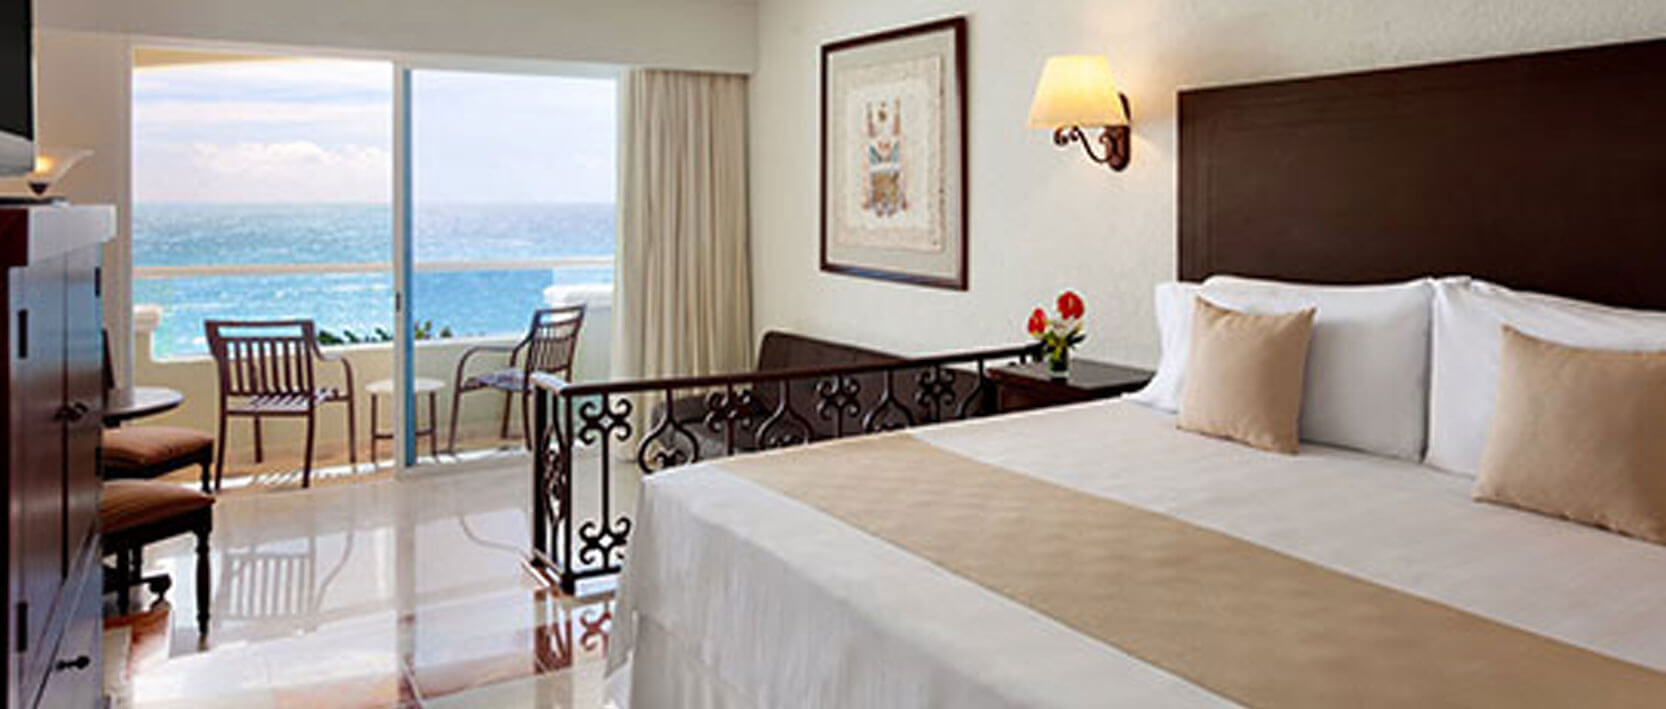 Gran Caribe Cancun Accommodations - Junior Suite Oceanfront